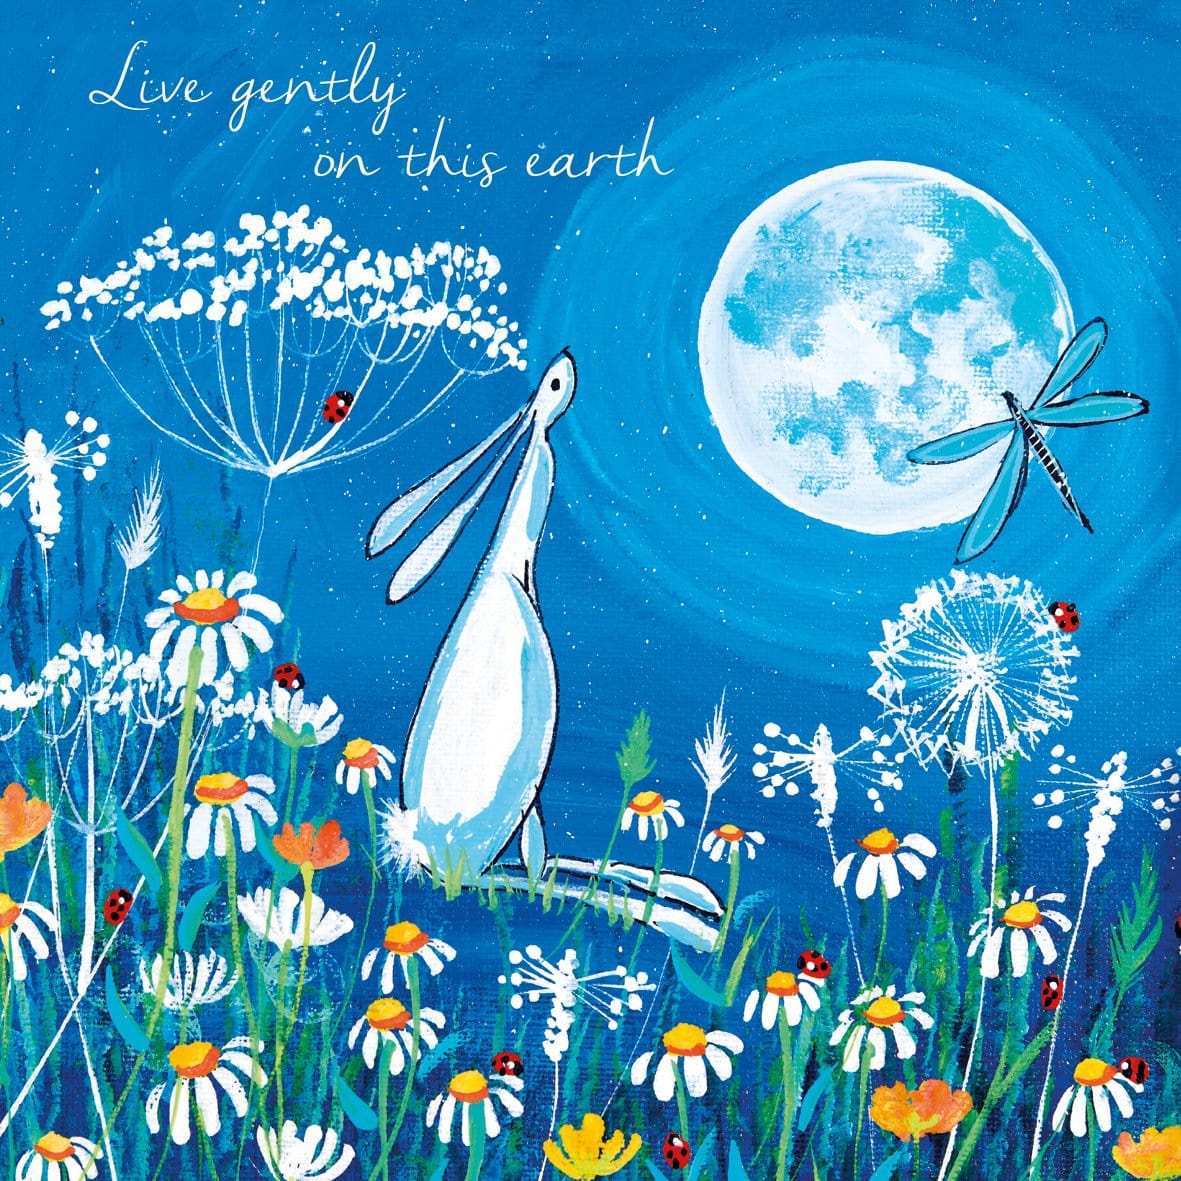 Live gently on this earth Greetings Card